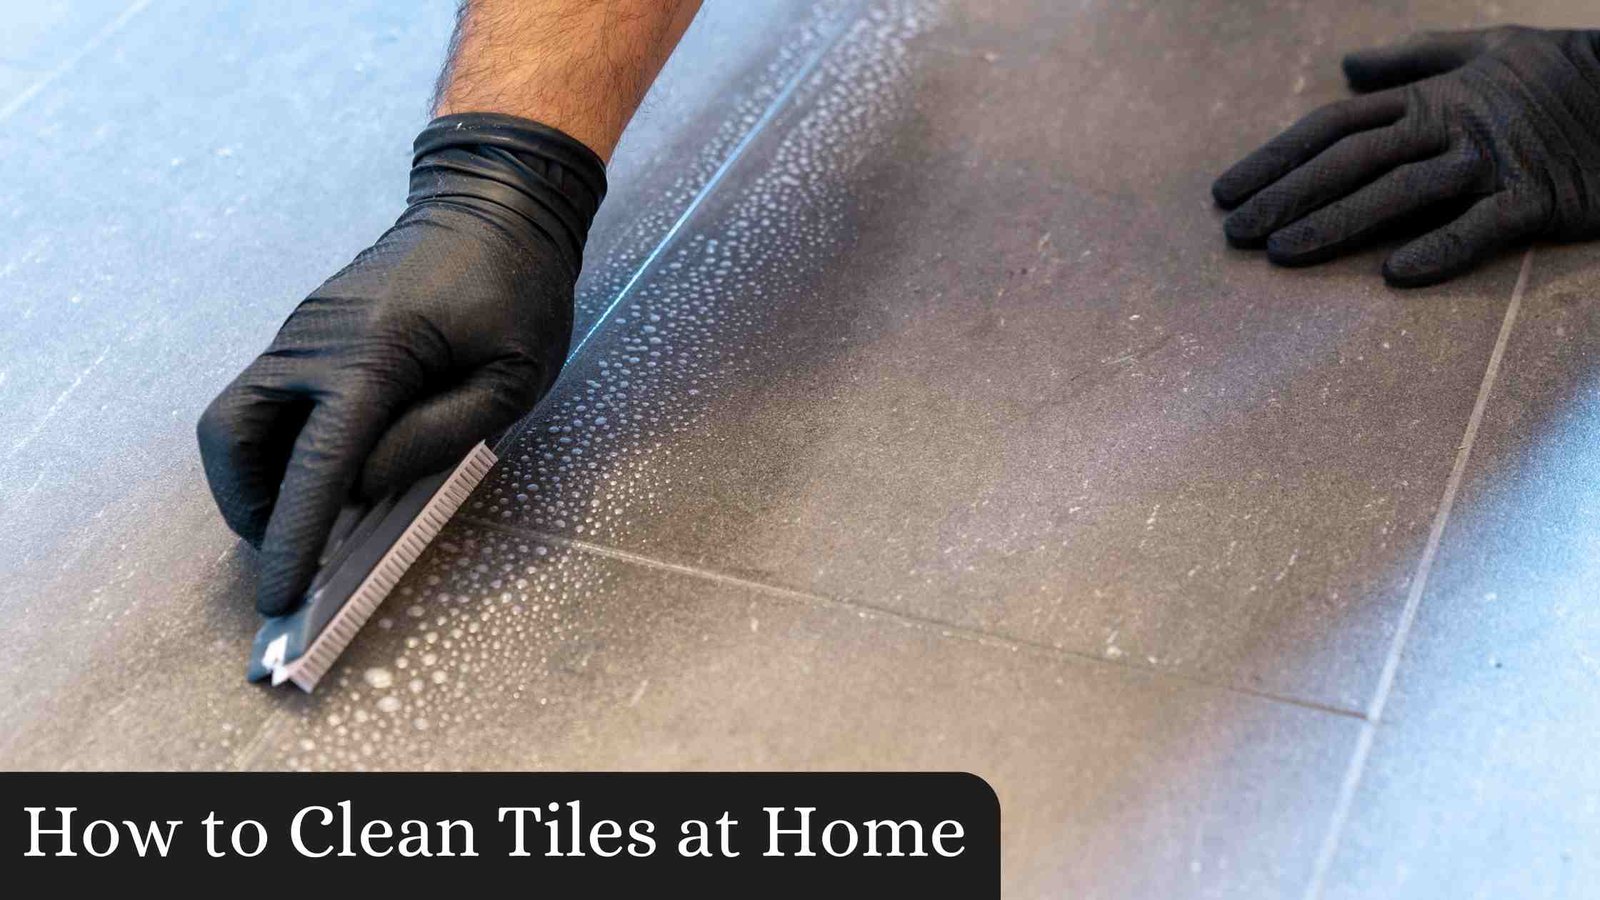 How to Clean Tiles at Home